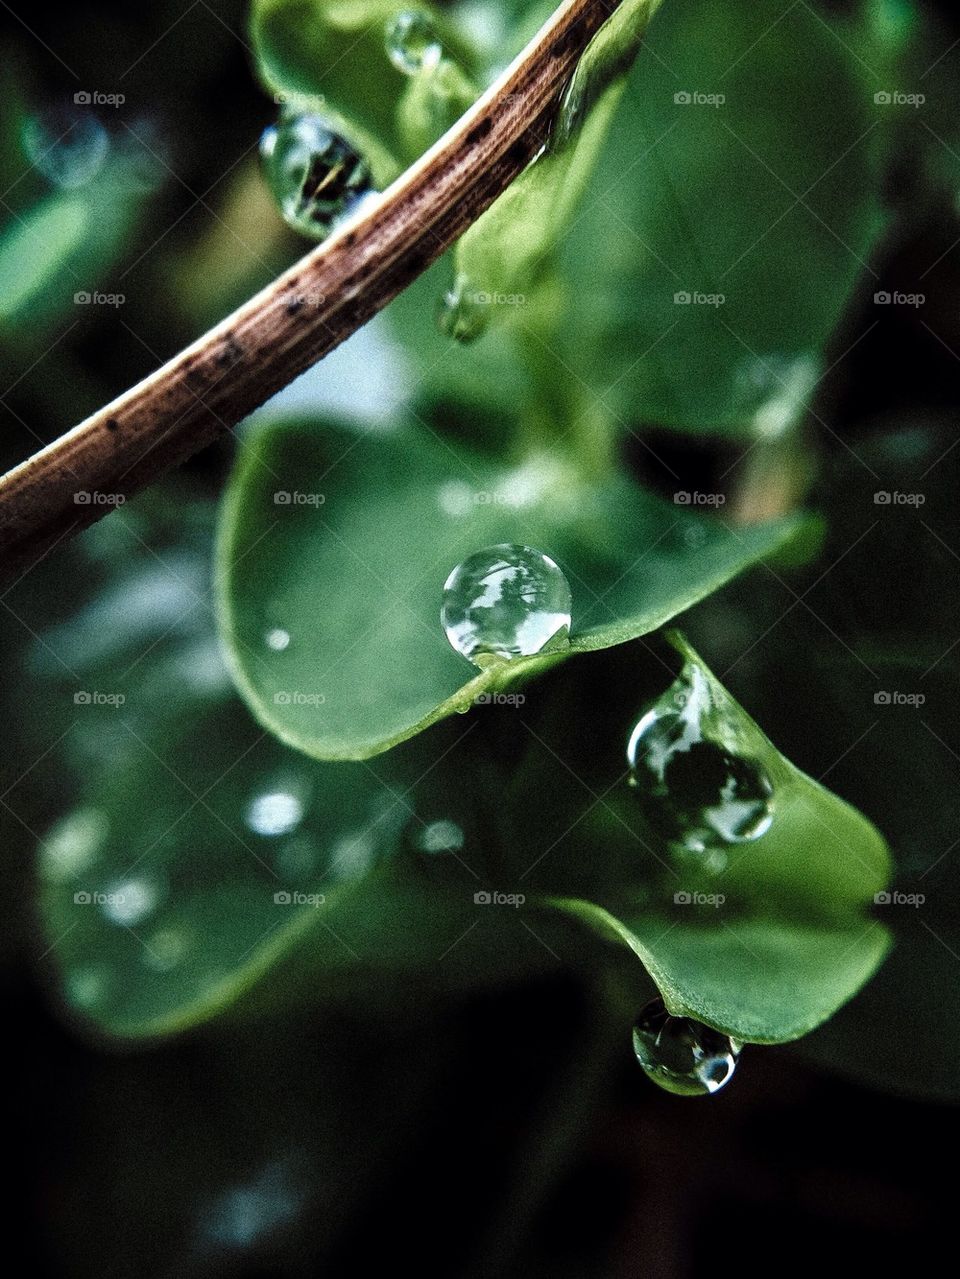 Dewdrops on a clover